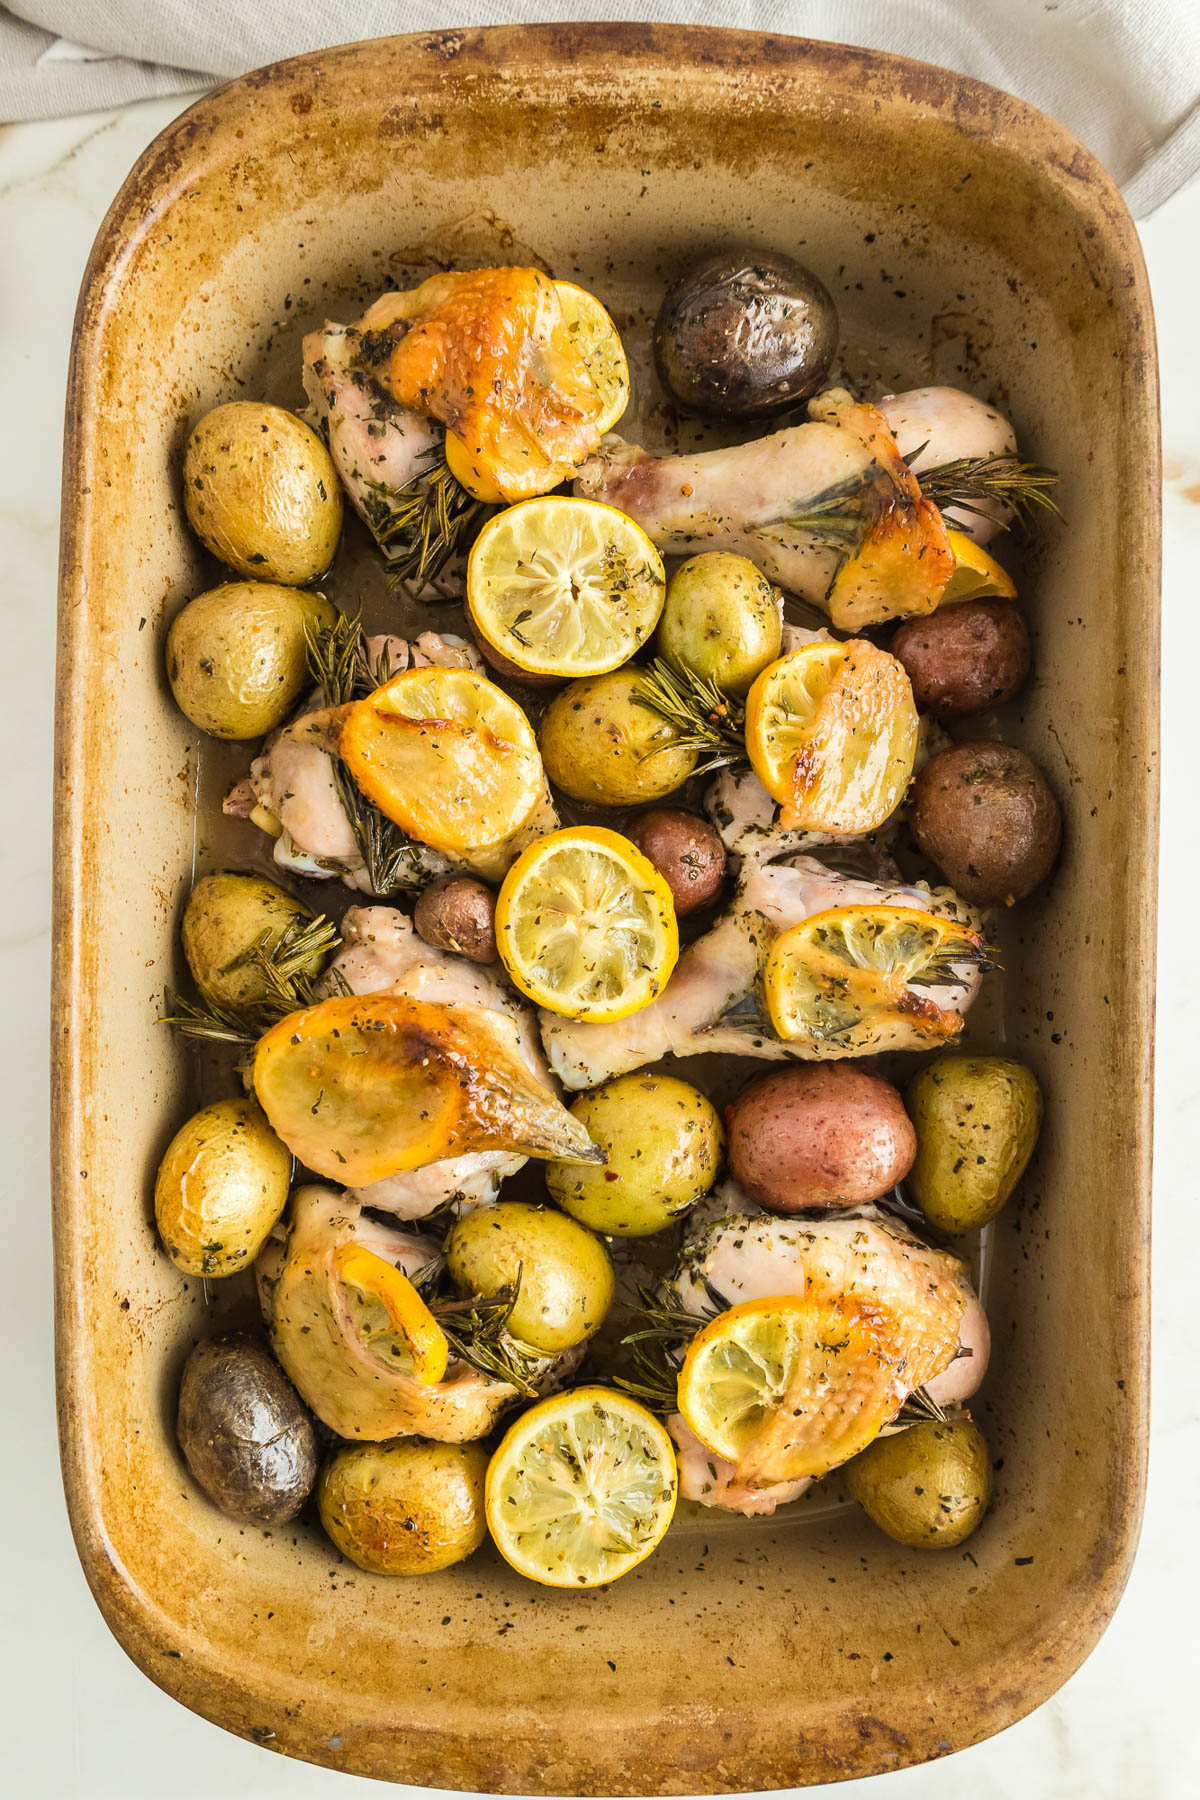 Roasted chicken with potatoes and lemons in a baking dish.